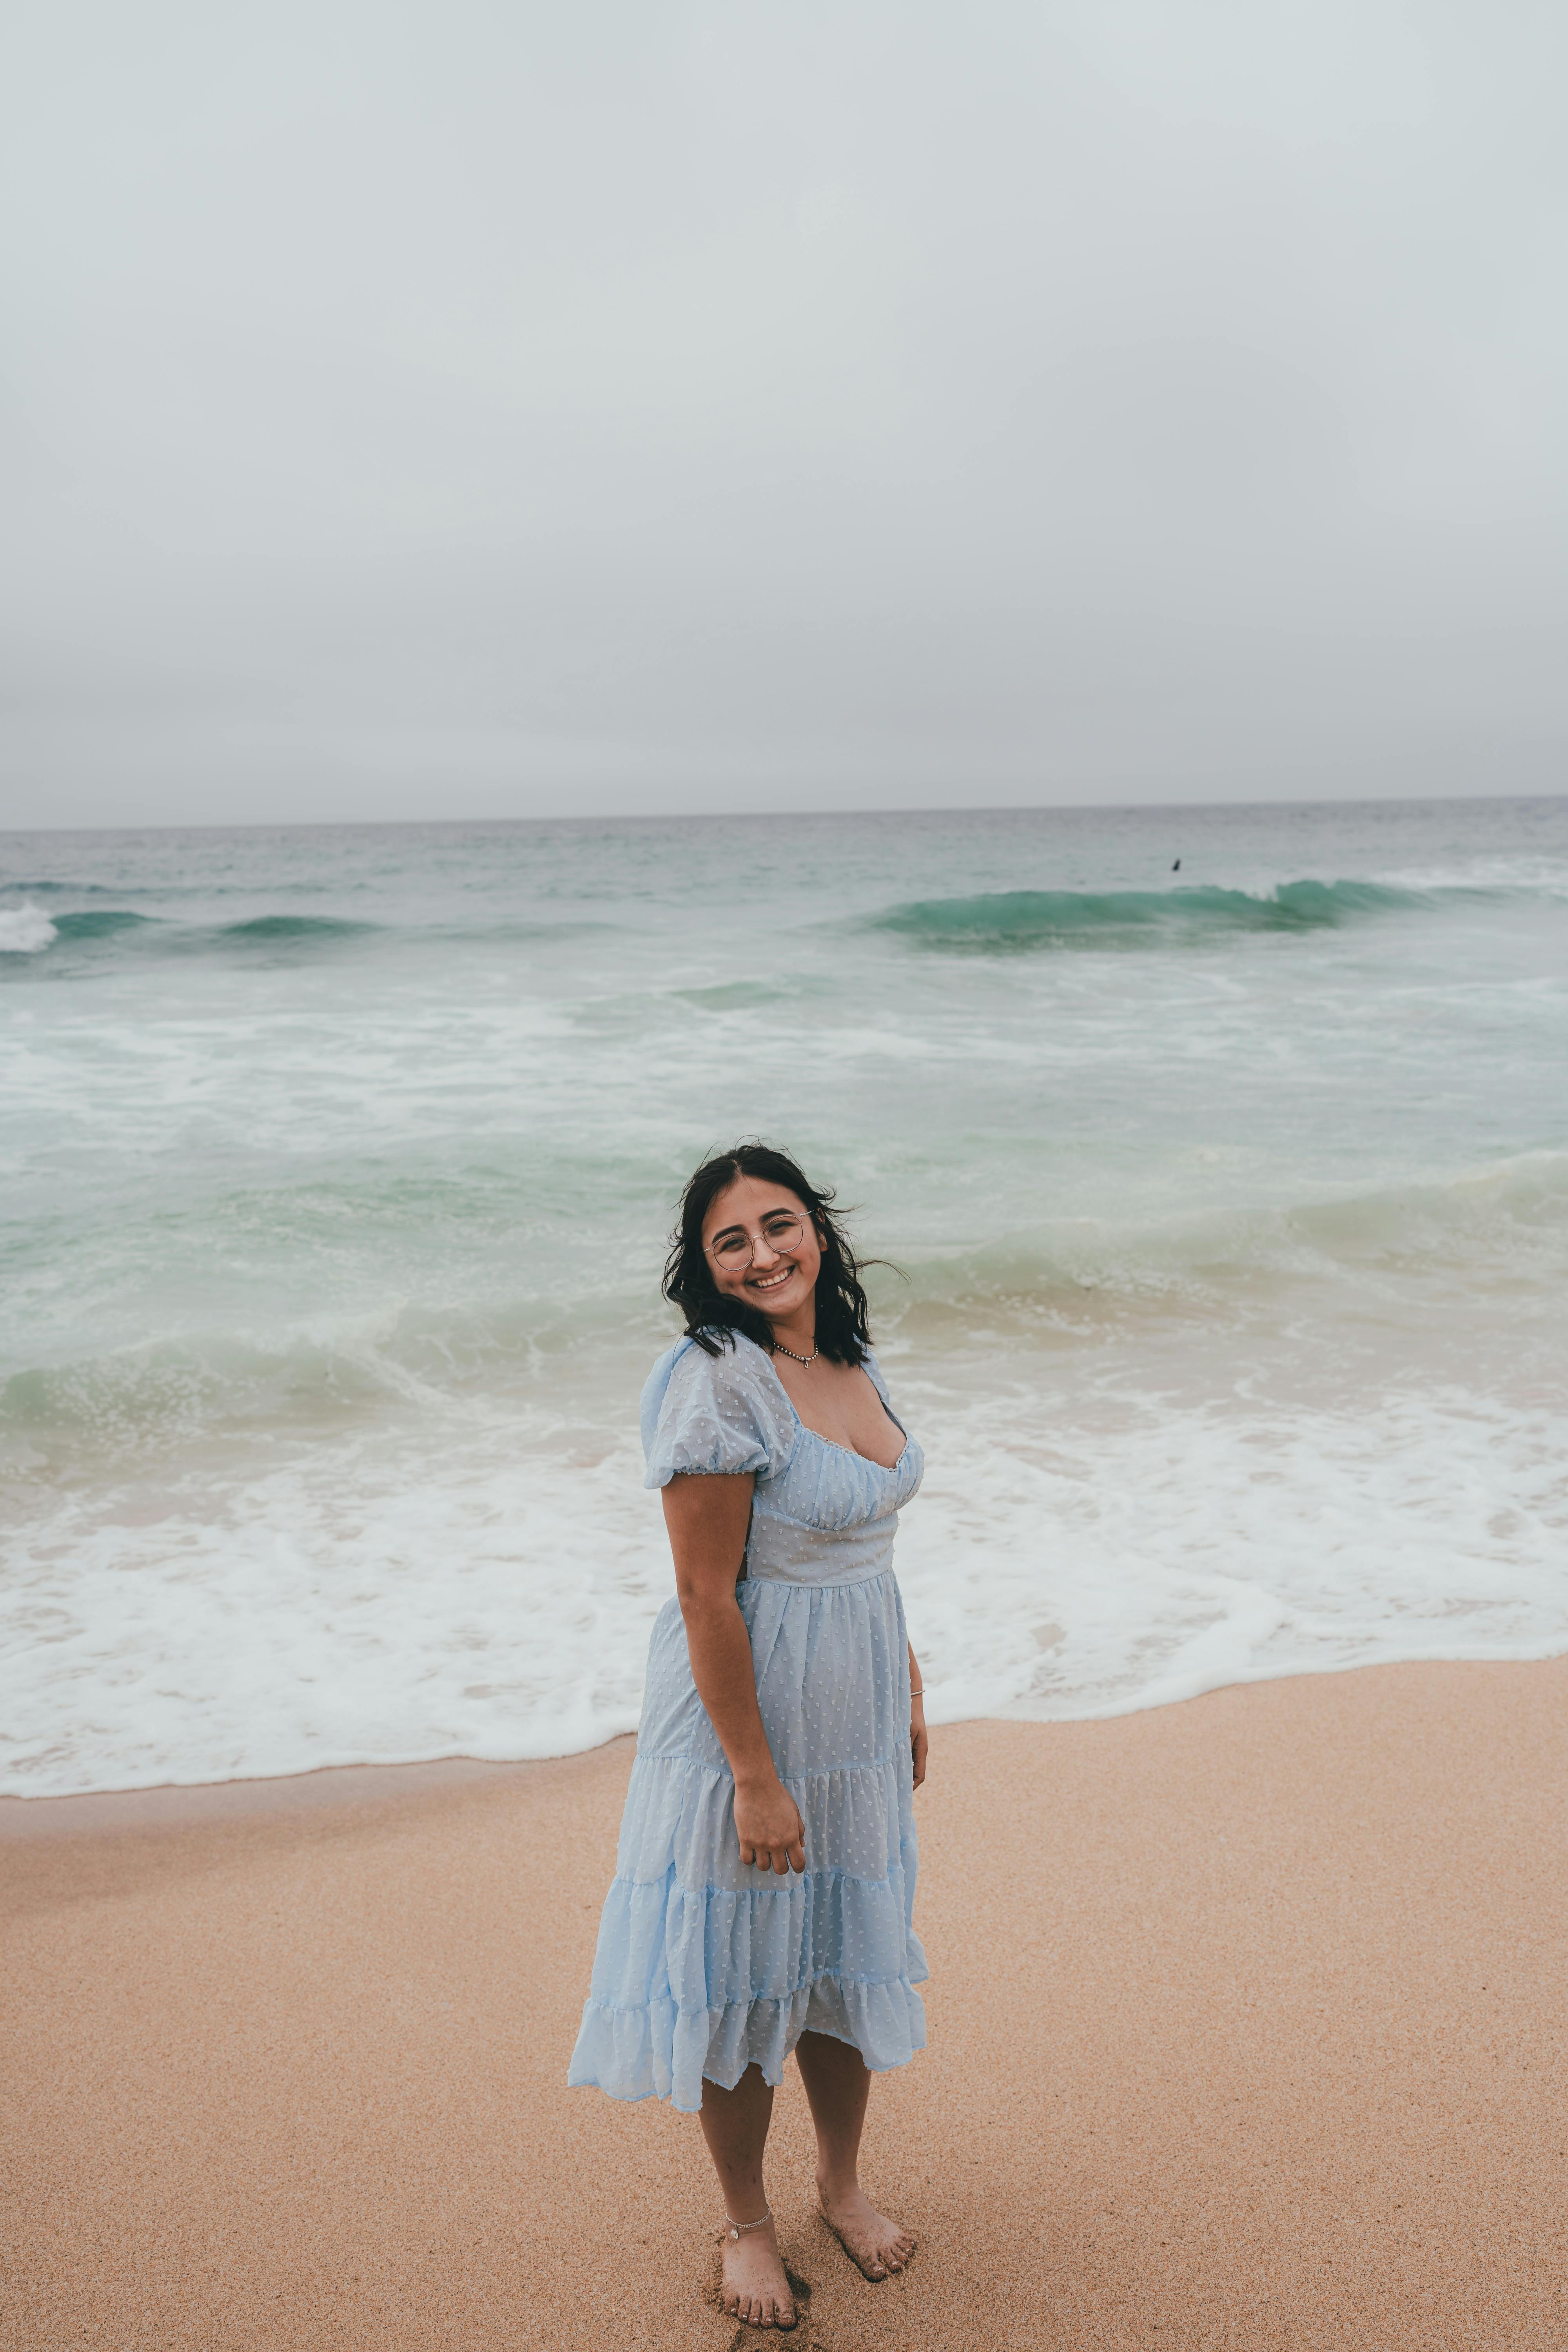 Beach Dress Photography - How To Pose At The Beach!